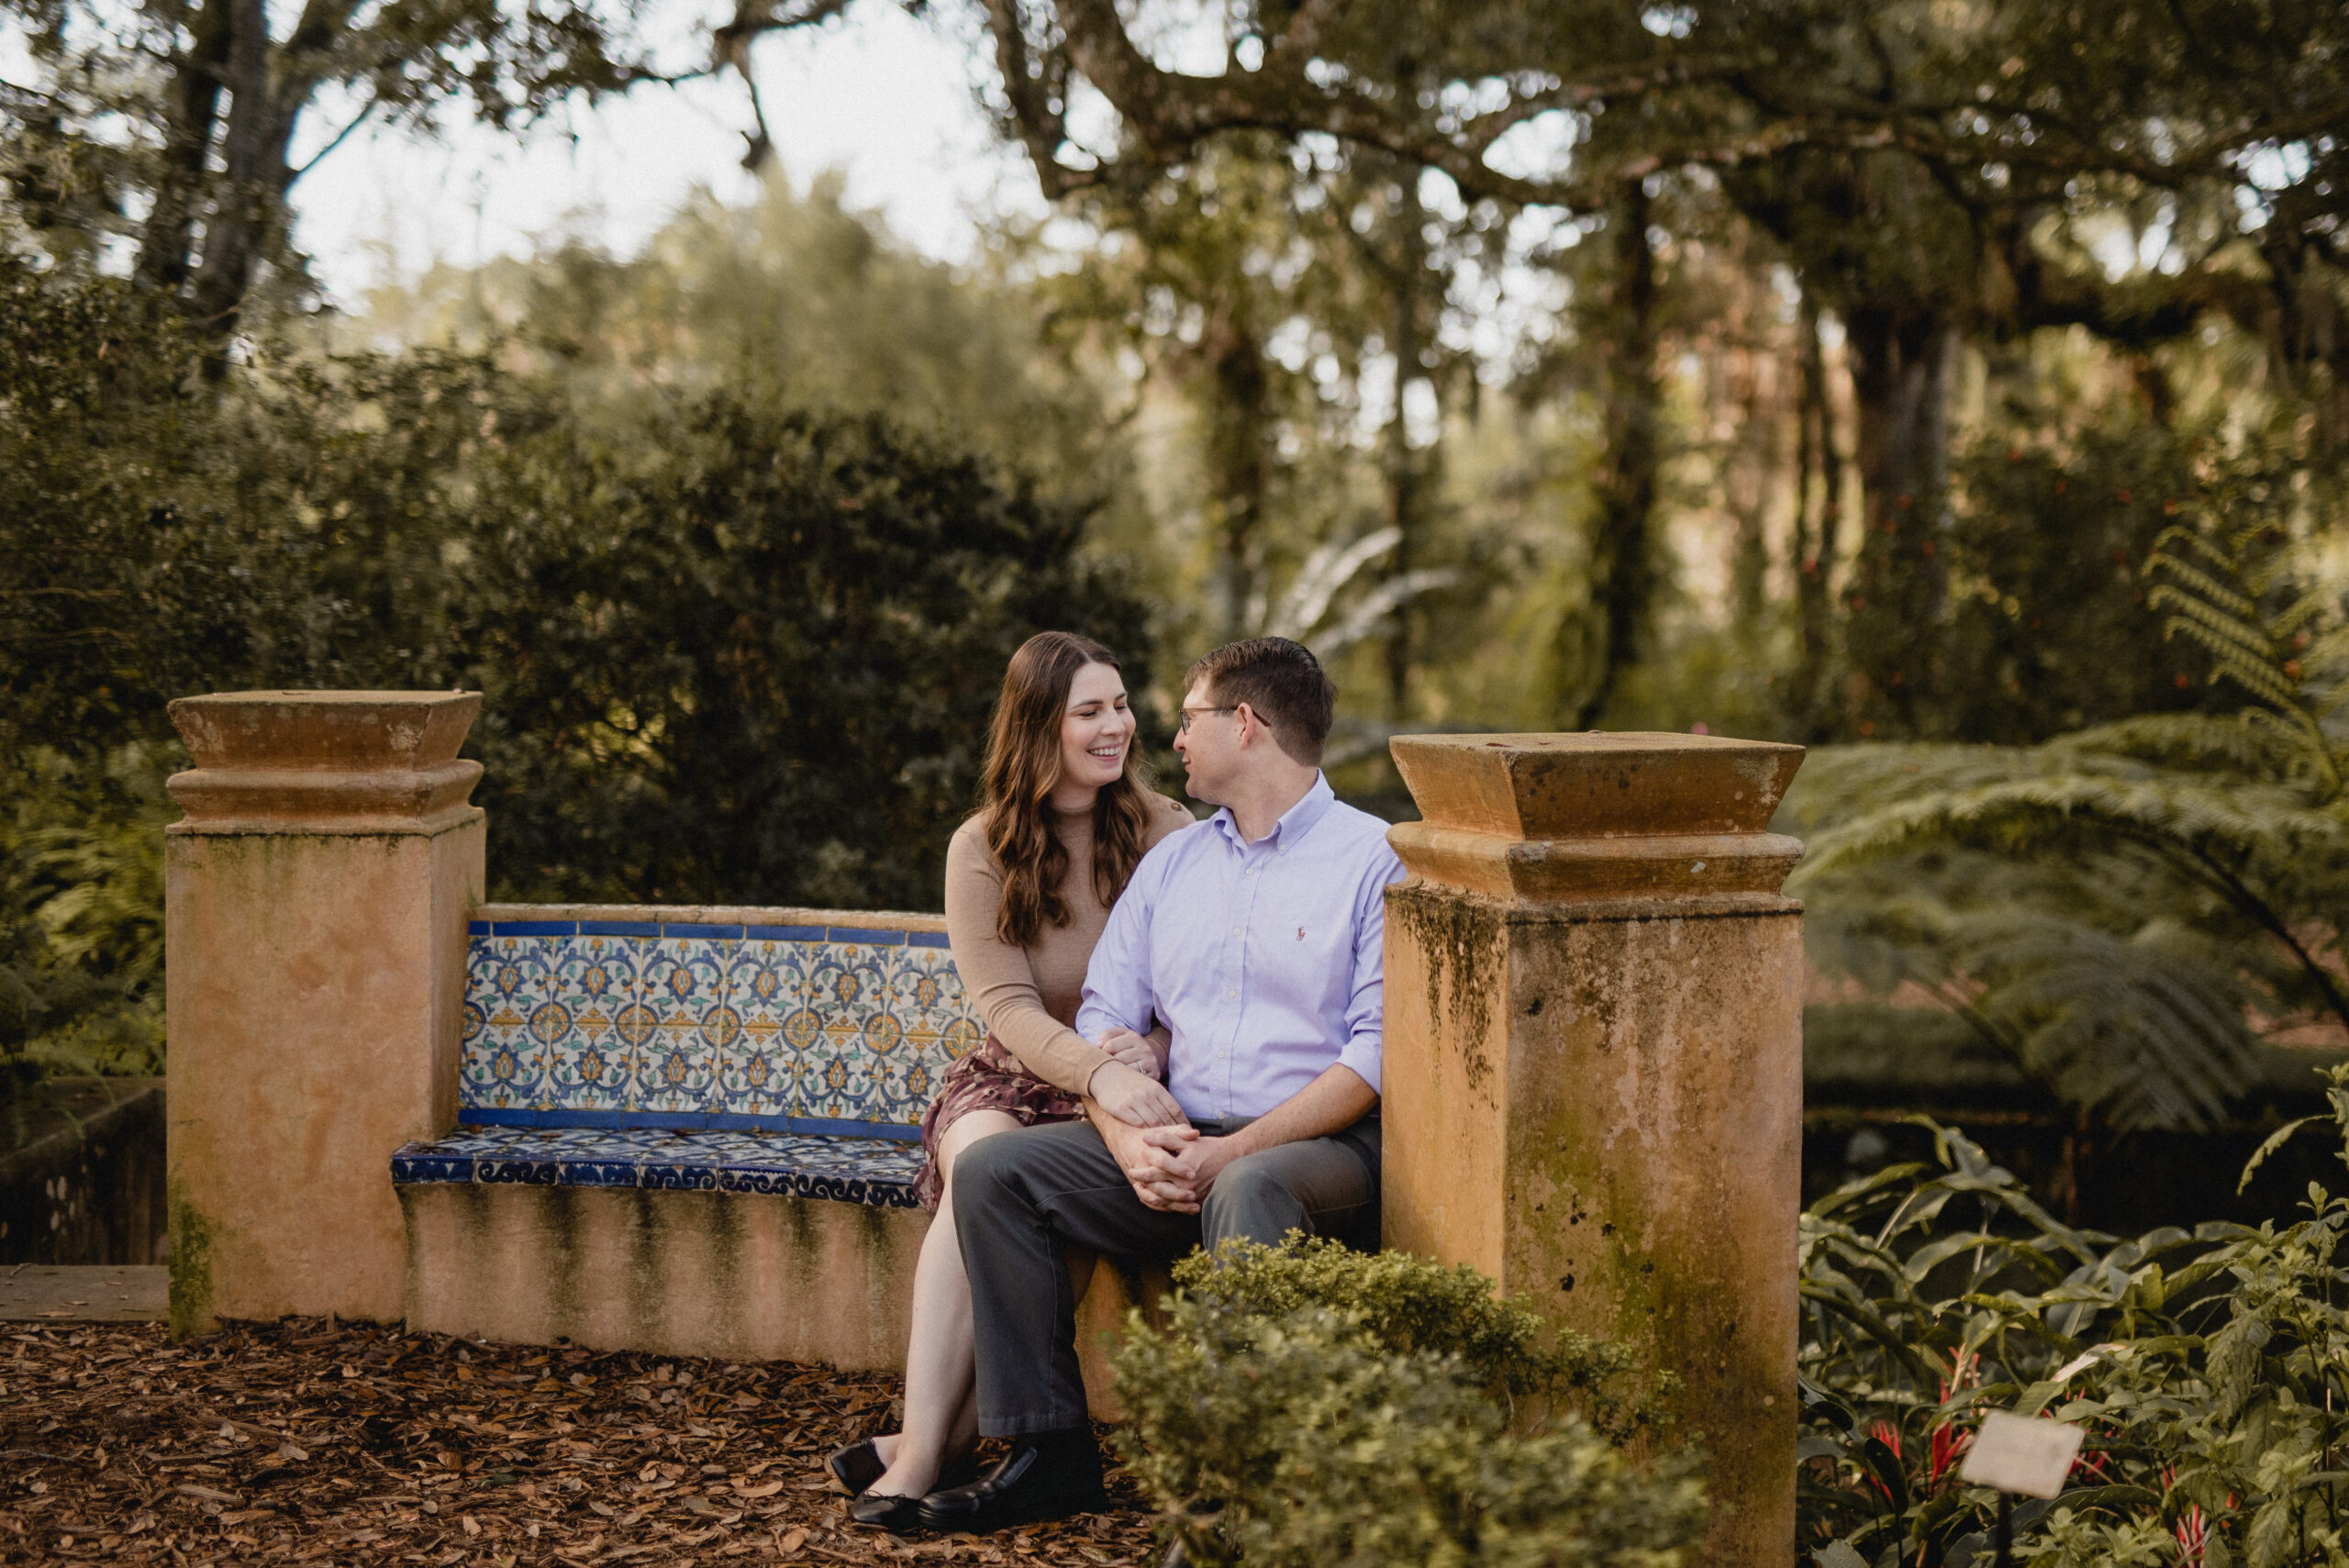 Orlando Downtown St Augustine Elopement Orlando Florida Central Florida Photographer Photography Engagement Couples Wedding Weddings Local Photographers Jacksonville Tampa Bok Tower Gardens Lake Wales engagement session